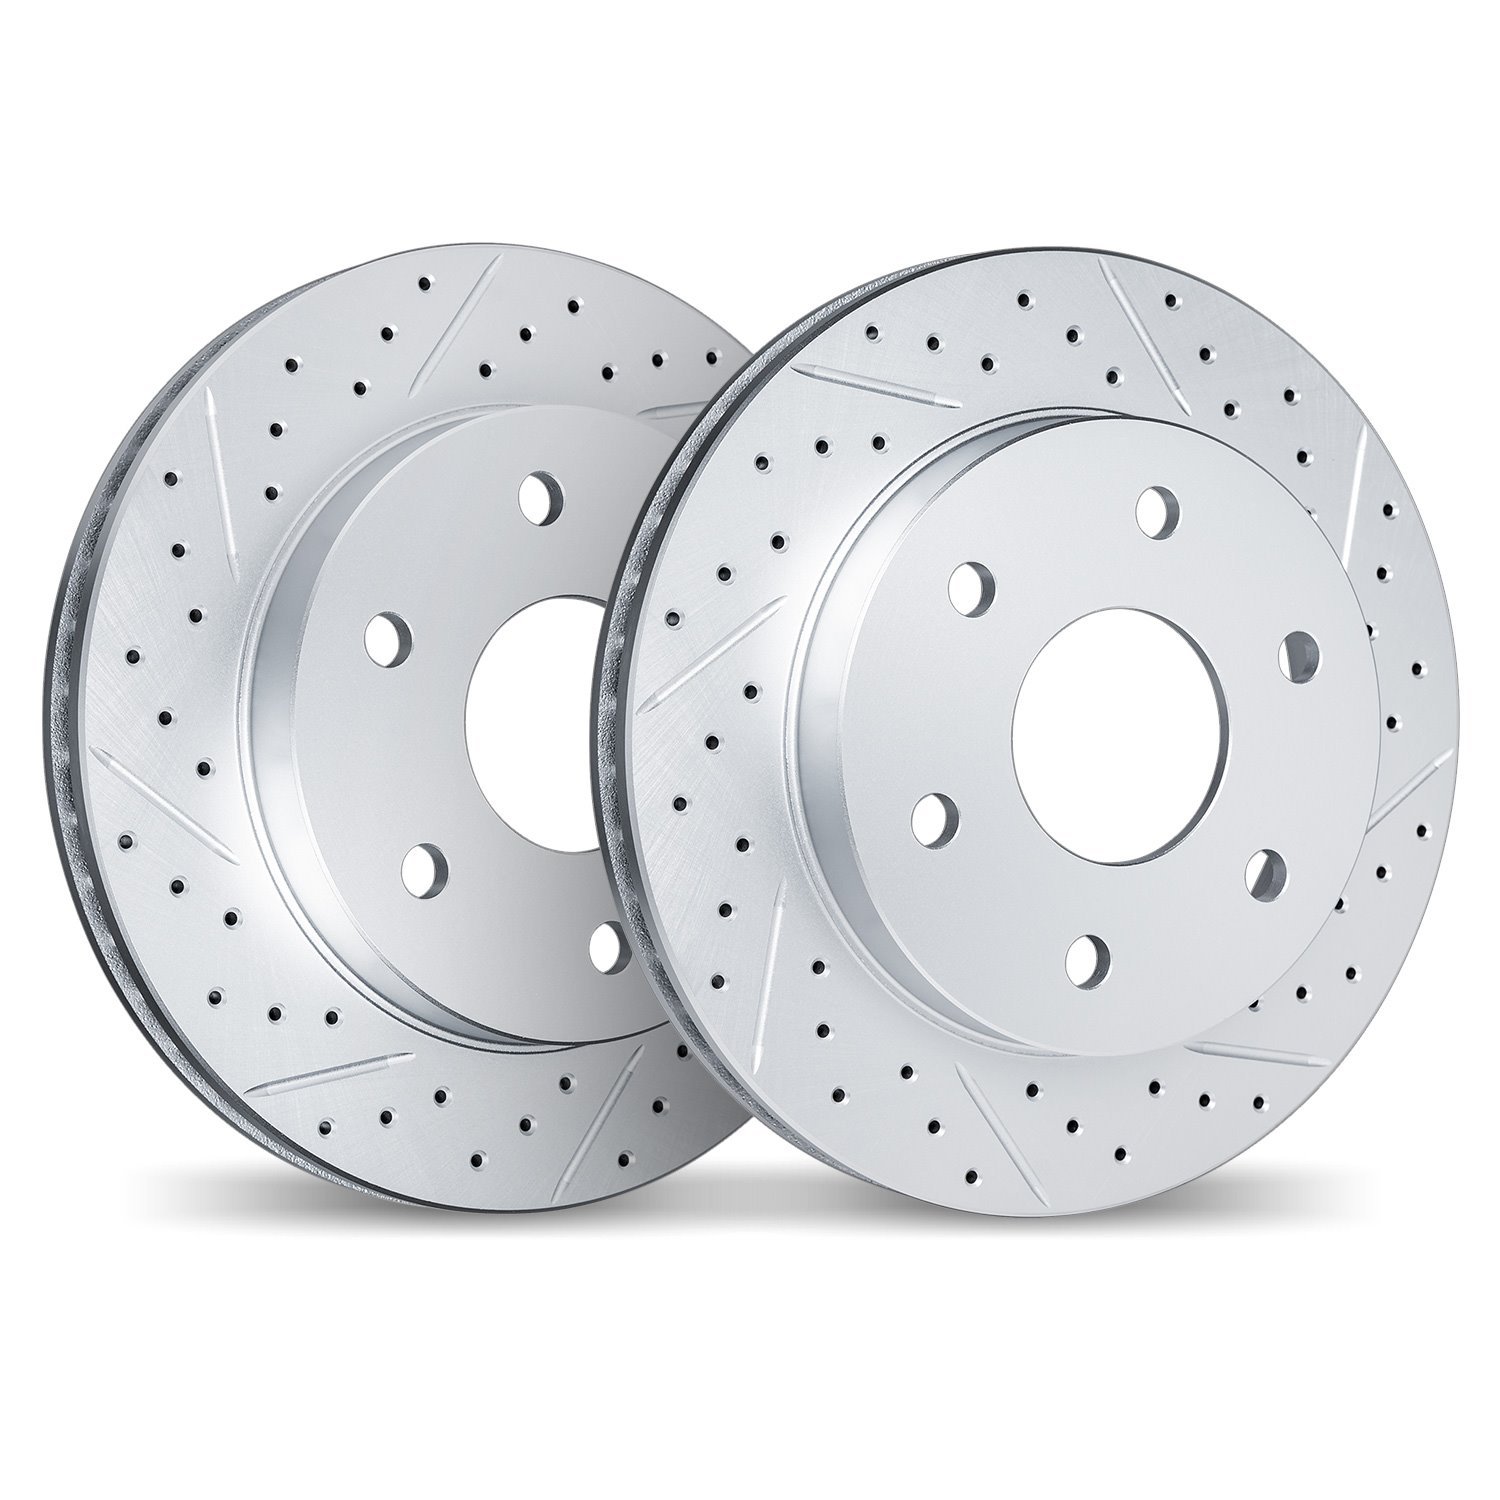 2002-54525 Geoperformance Drilled/Slotted Brake Rotors, Fits Select Ford/Lincoln/Mercury/Mazda, Position: Rear